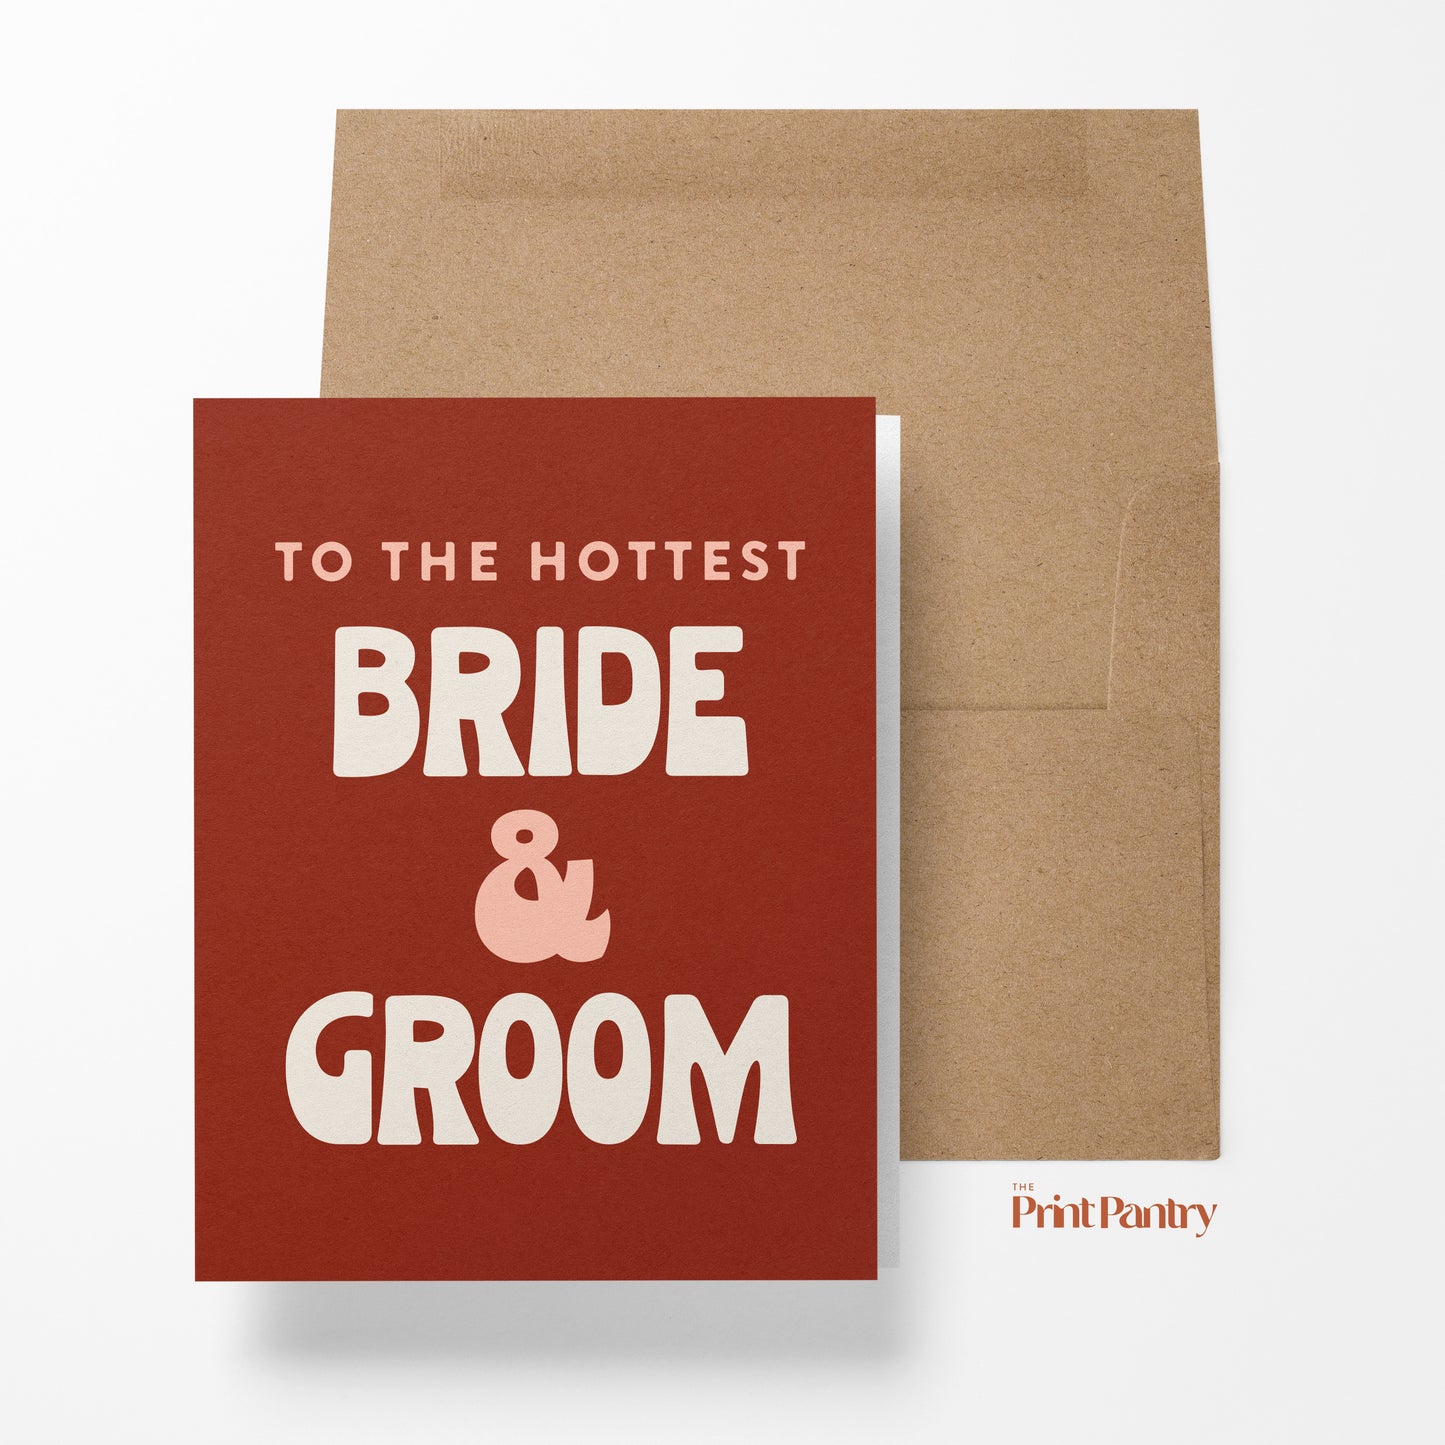 The Hottest Bride & Groom Card